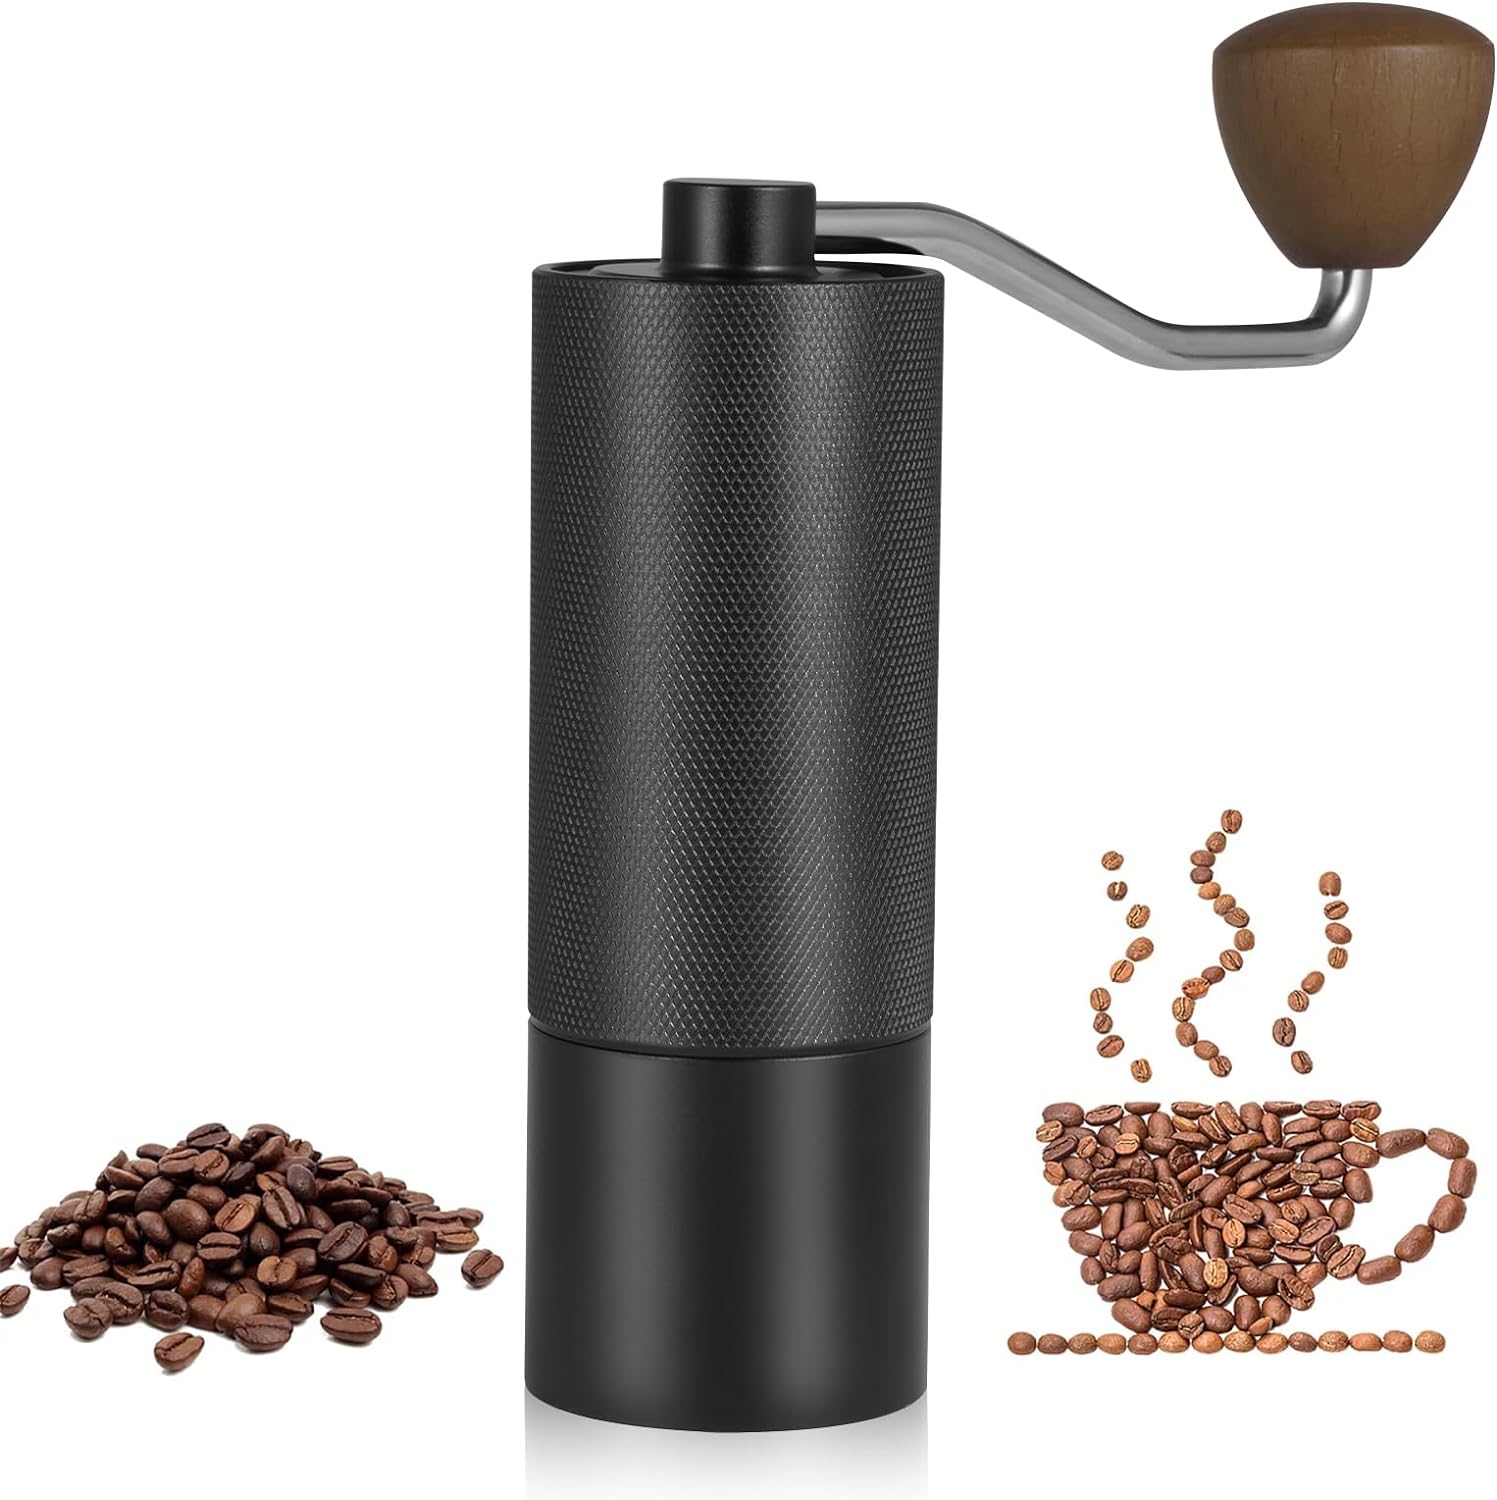 Manual Coffee Grinder, Coffee Grinder Hand Made of Stainless Steel, Adjustable Grinding Degree, Hand Coffee Grinder, Portable Coffee Grinder Manual for Espresso French